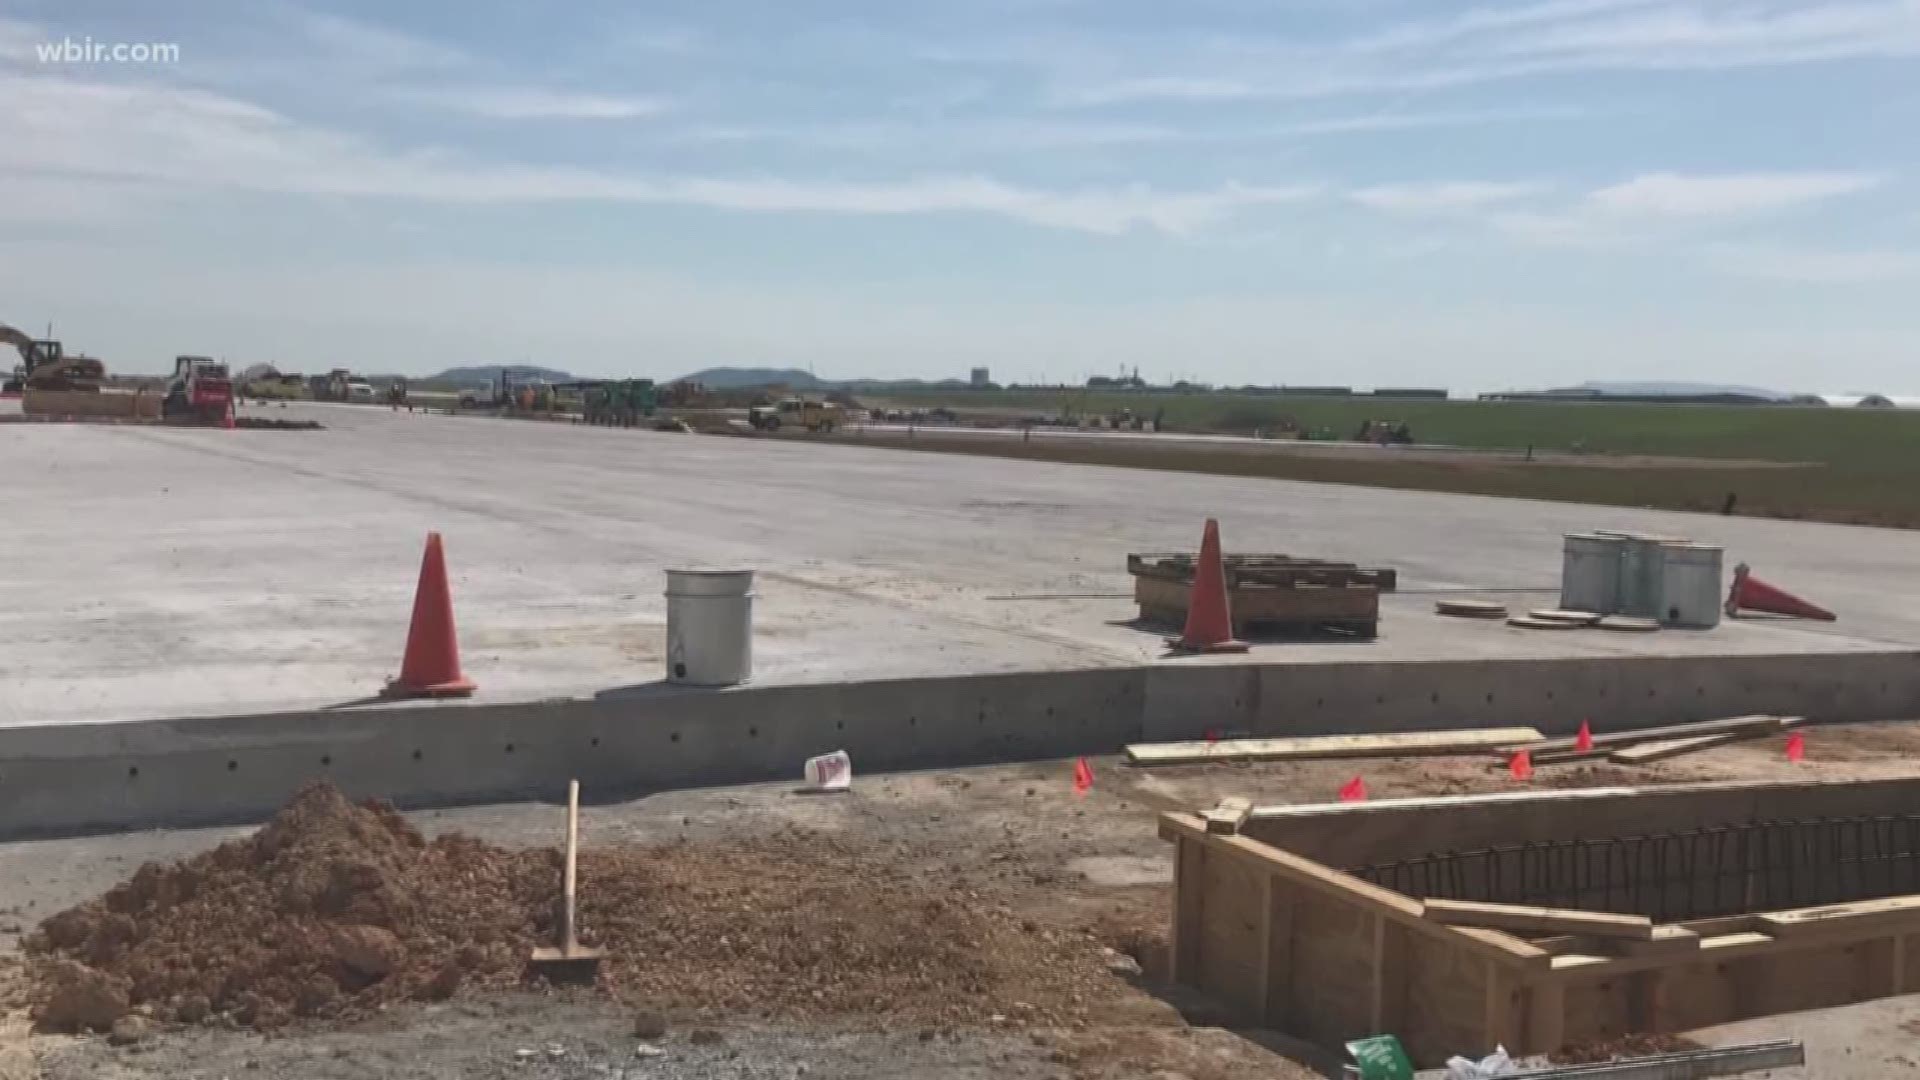 The improvements include a 10,000-foot-runway expansion that McGhee Tyson says is now complete. The runway is what the airport says is a milestone in a $110 million airfield modernization project.